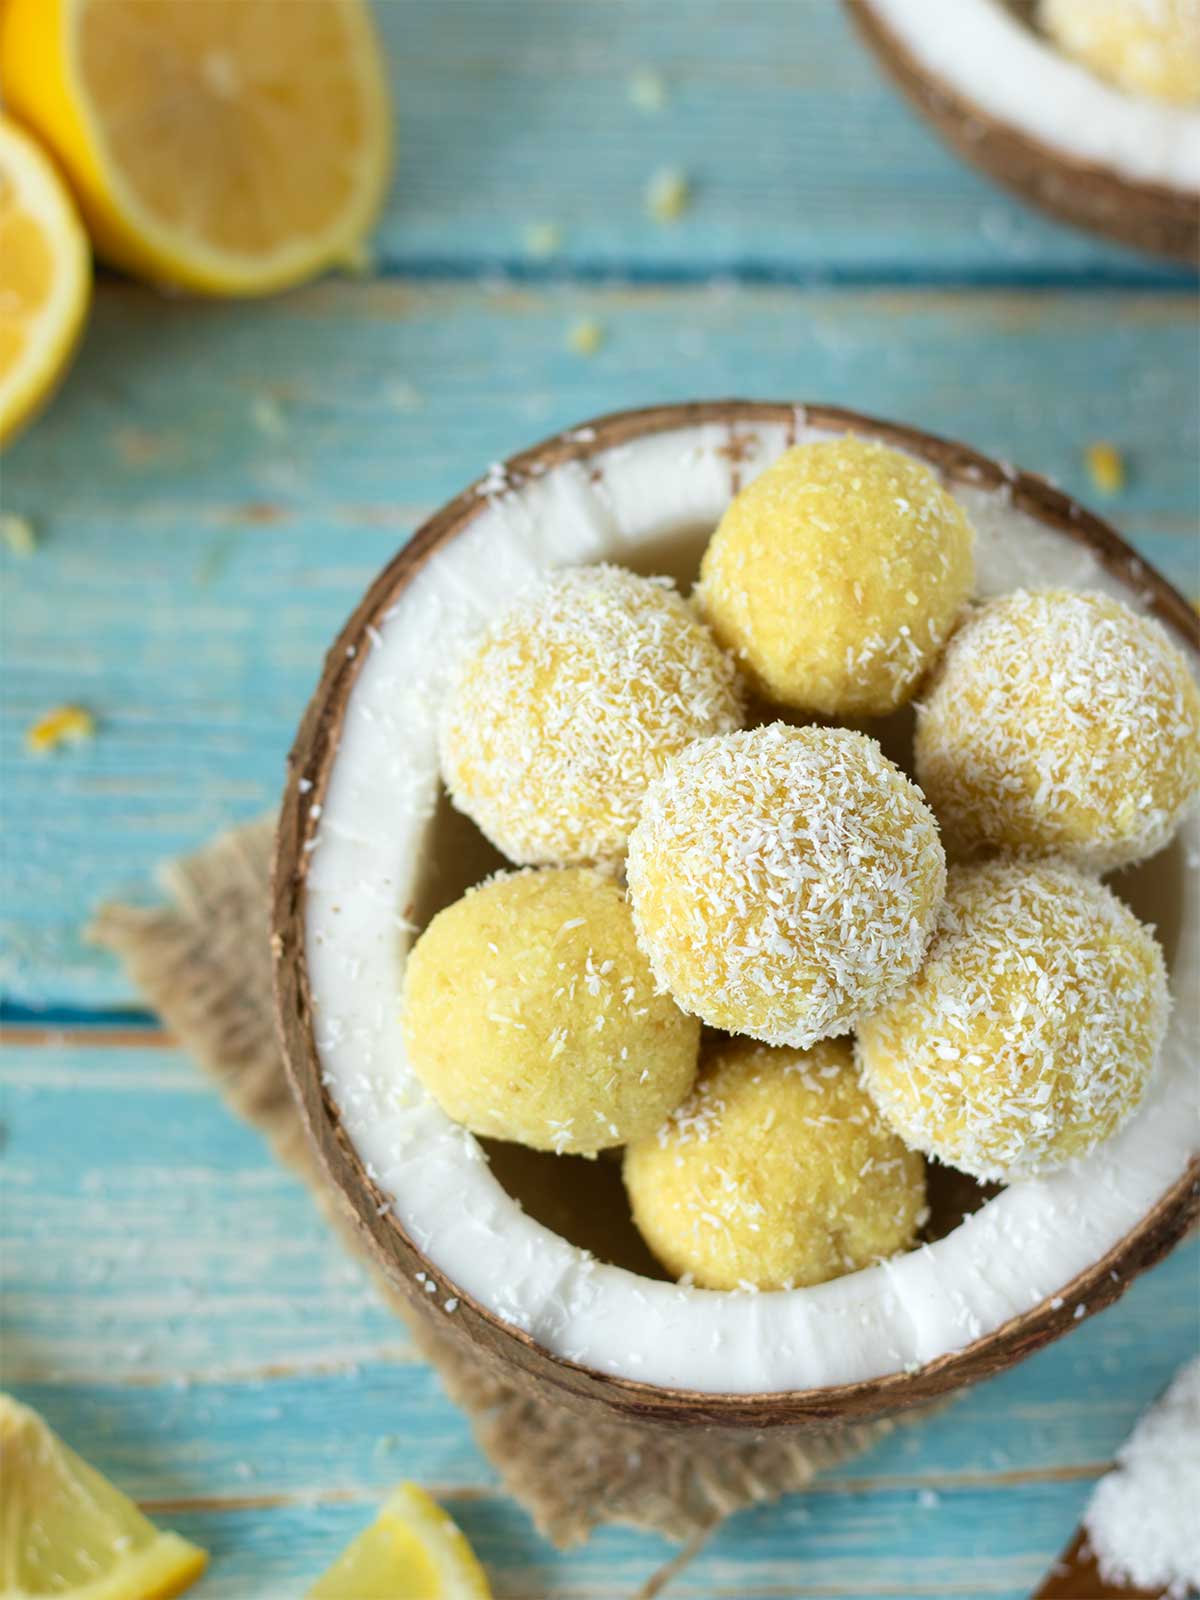 Lemon coconut balls in a coconut shell on blue wooden table with desiccated coconut flakes and sliced lemon.